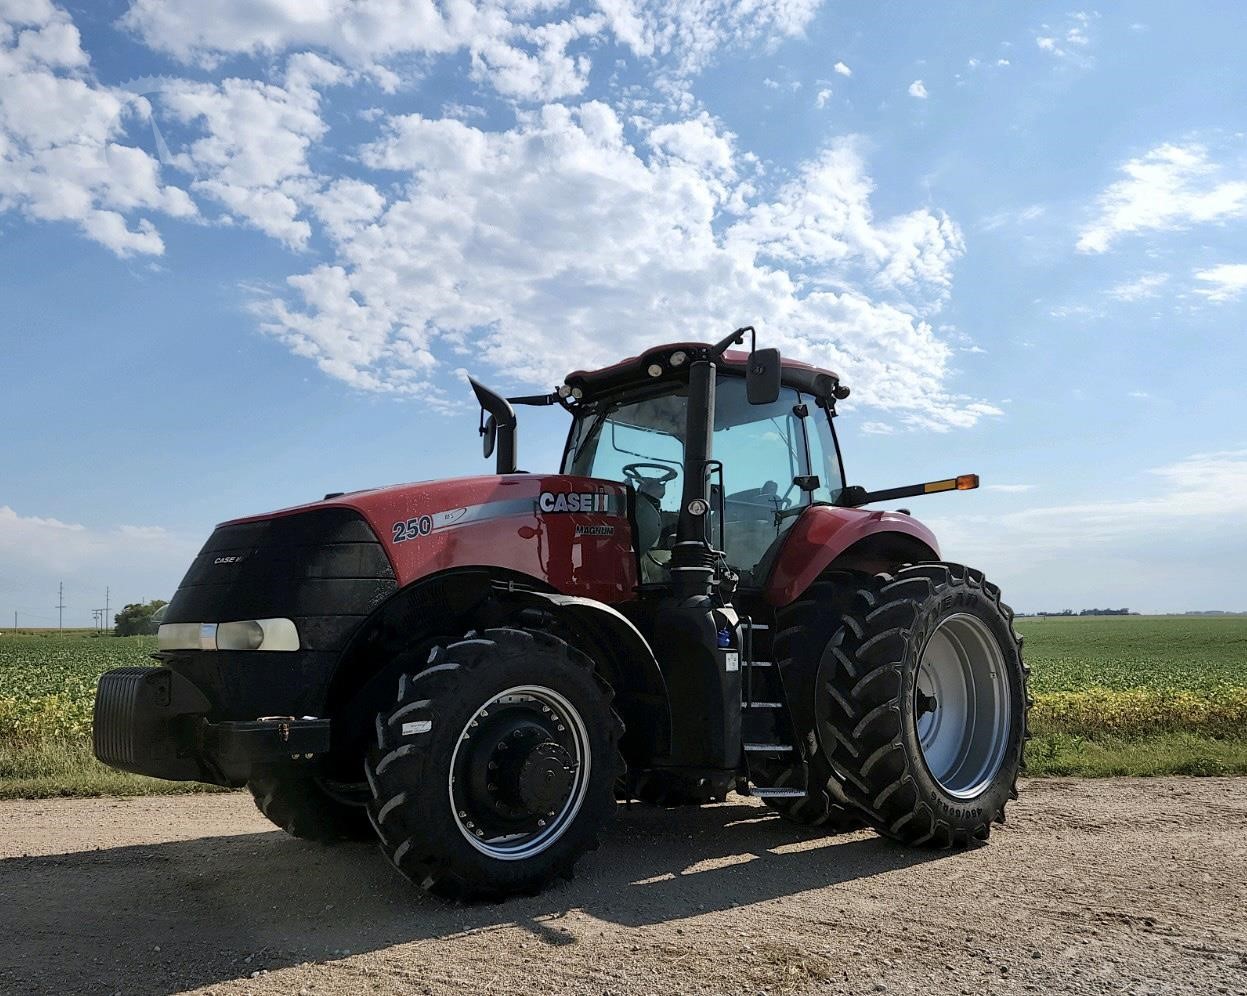 CASE IH MAGNUM 250 Auction Results - 9 Listings | AuctionTime.com - 1 of 1